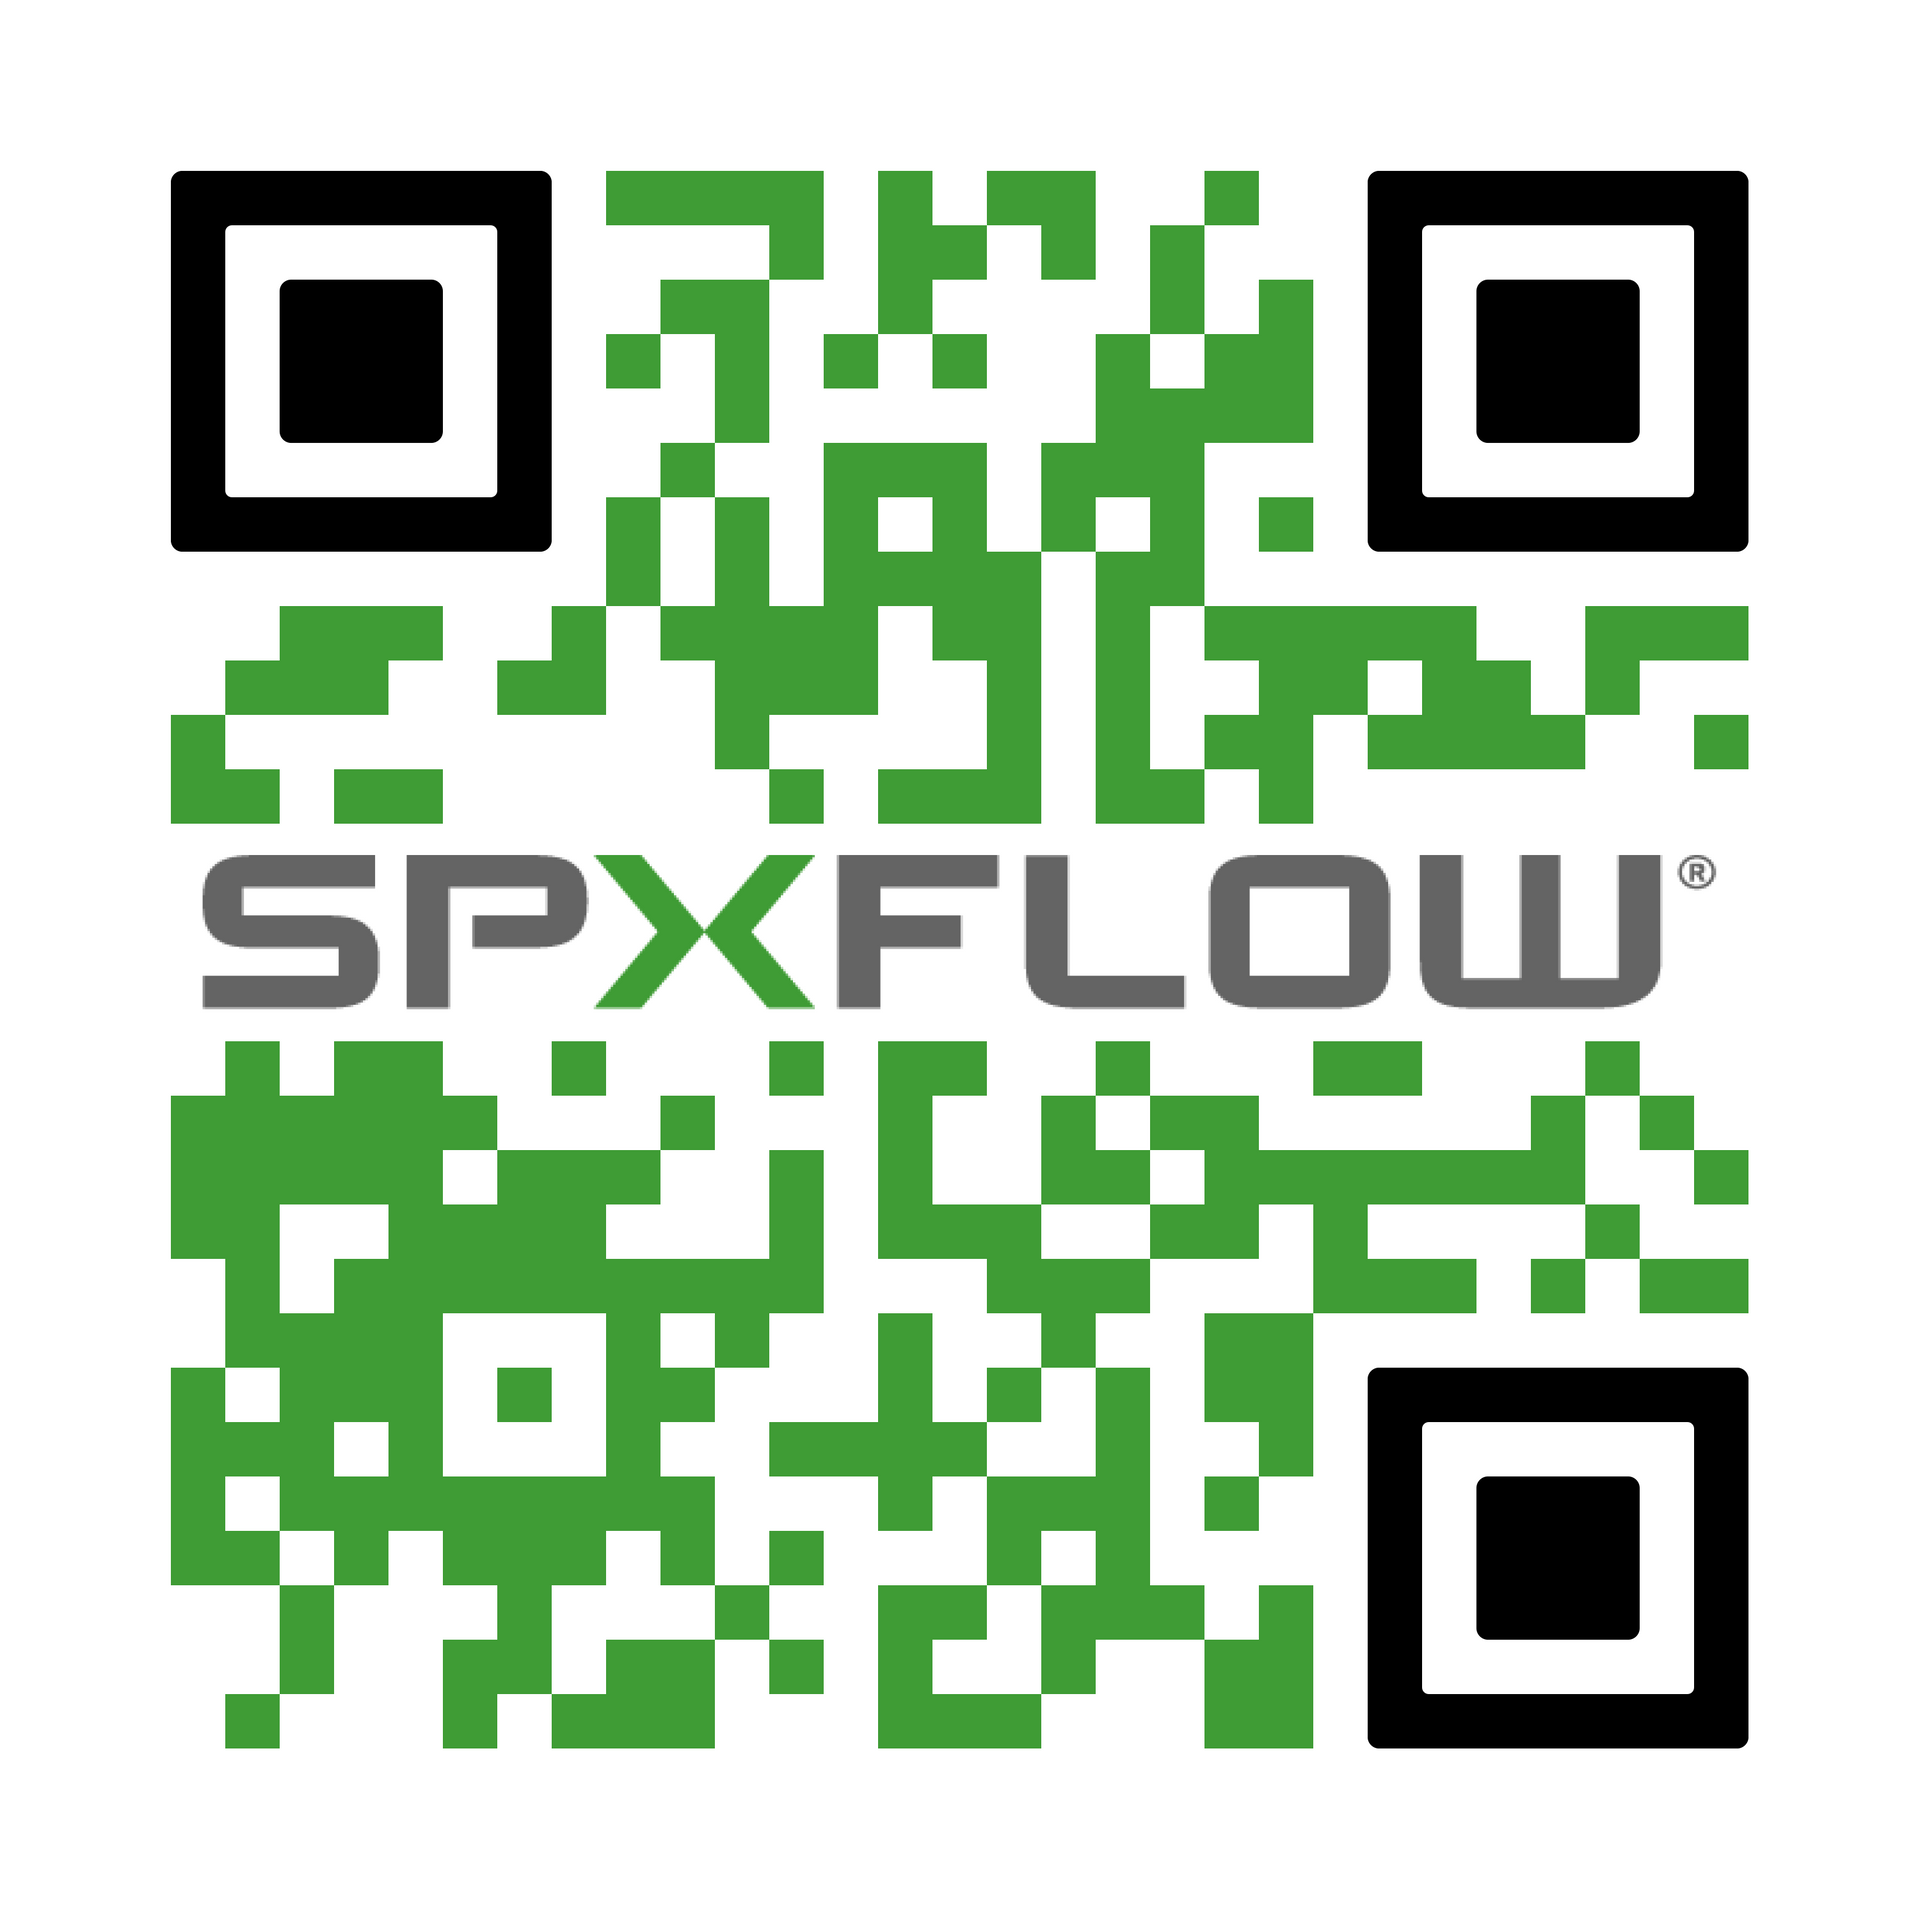 SPX FLOW Bolting Systems catalog QR code